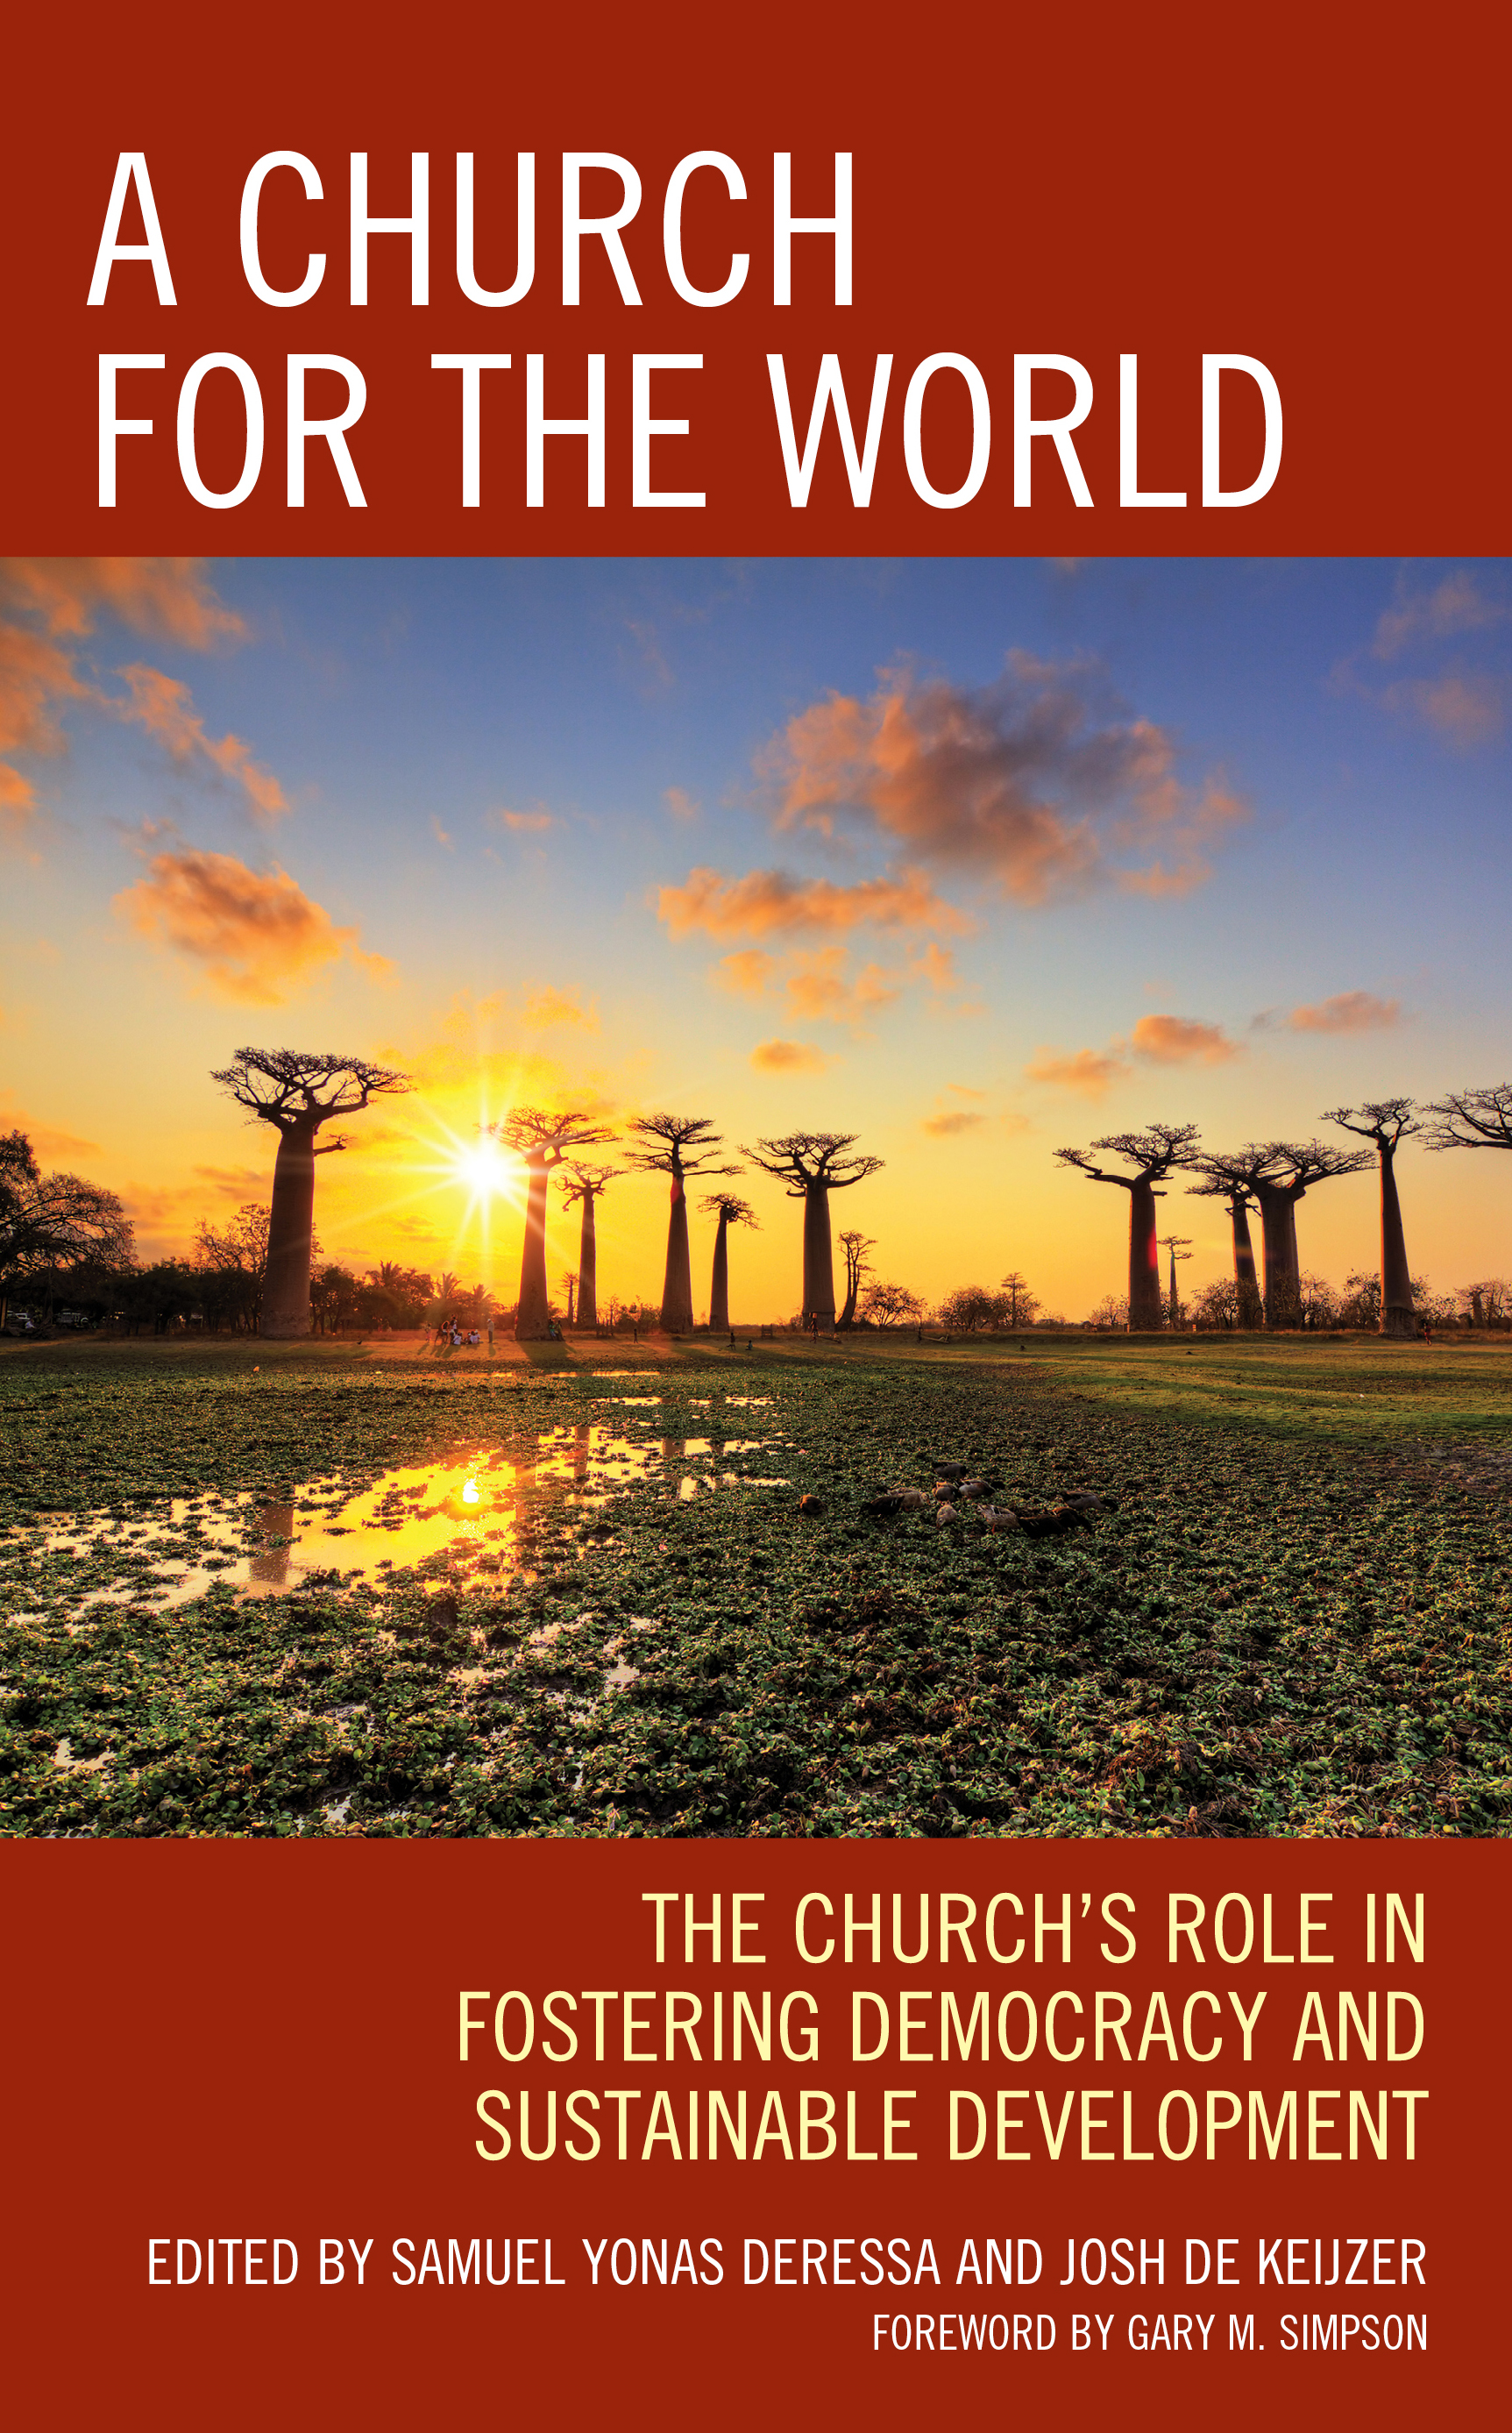 A Church for the World: The Church’s Role in Fostering Democracy and Sustainable Development